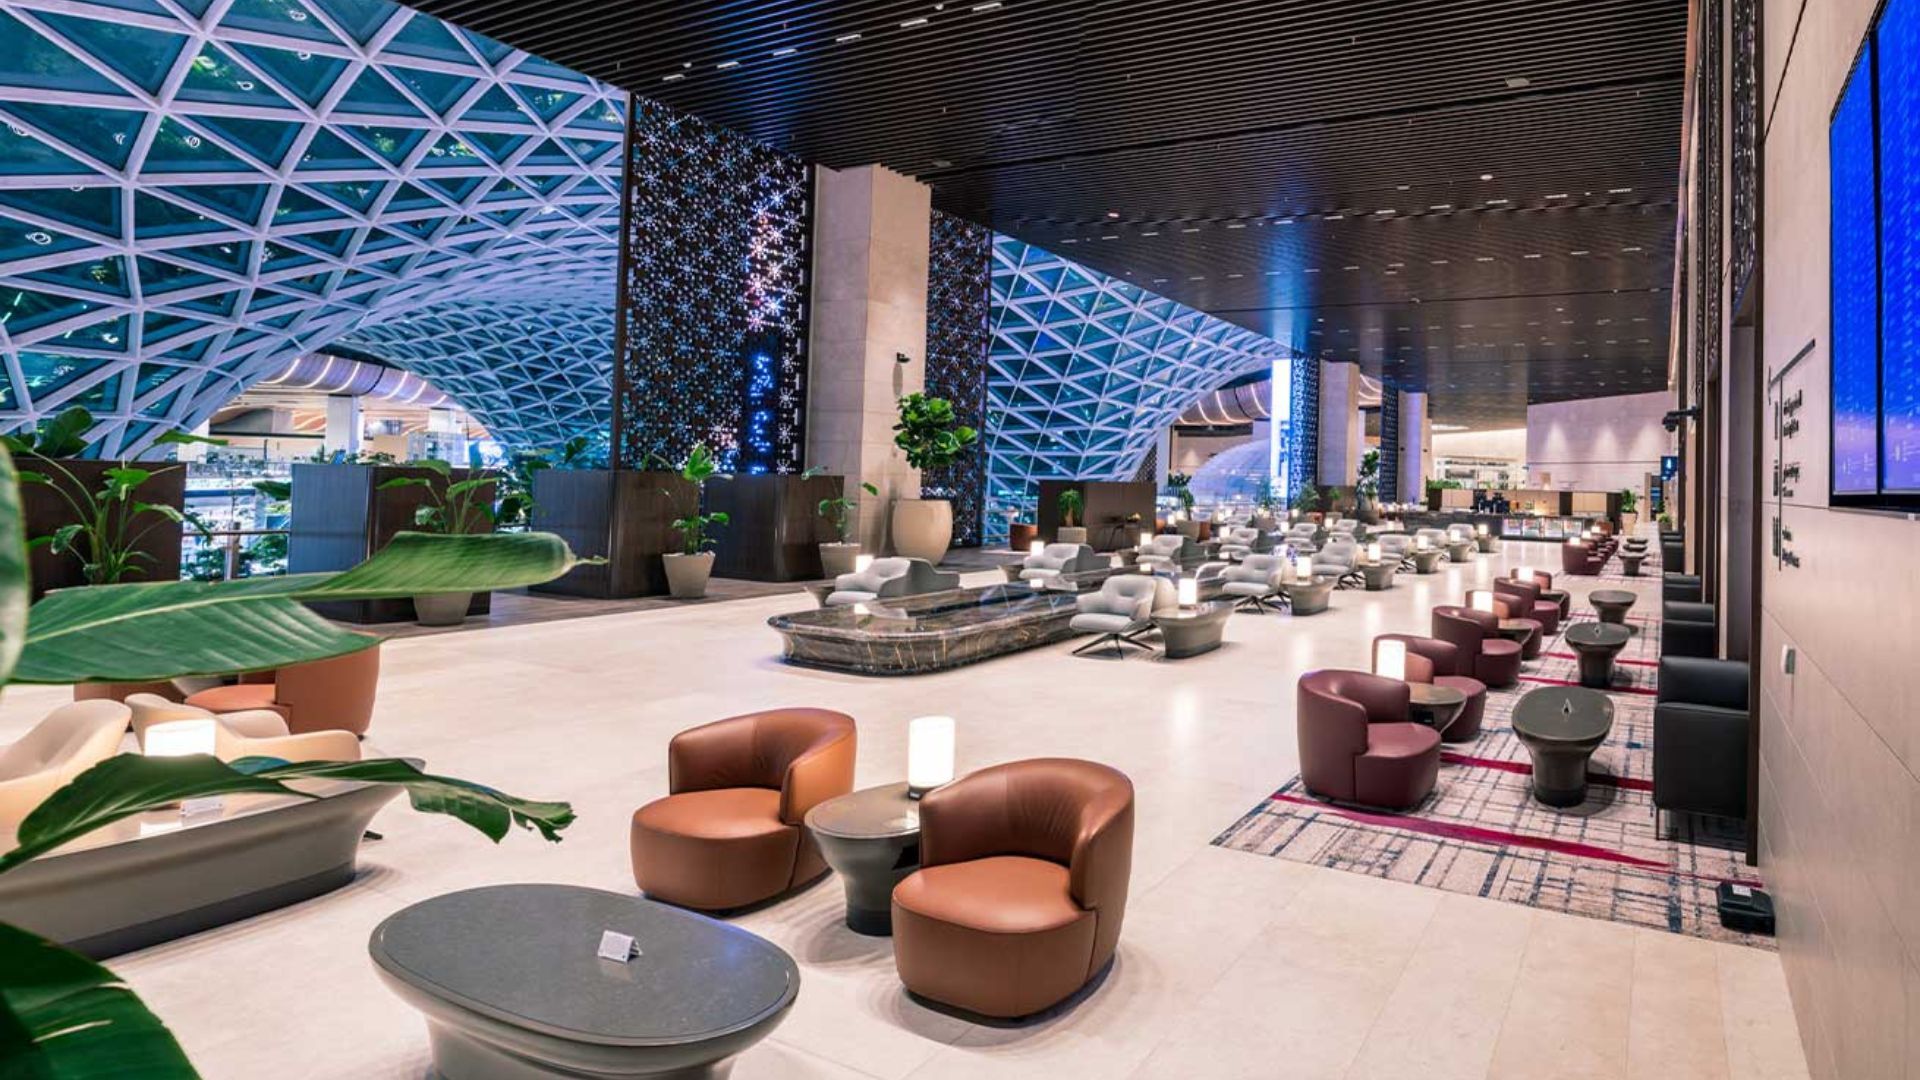 Fashion House Airport Lounges : luxurious airport lounge